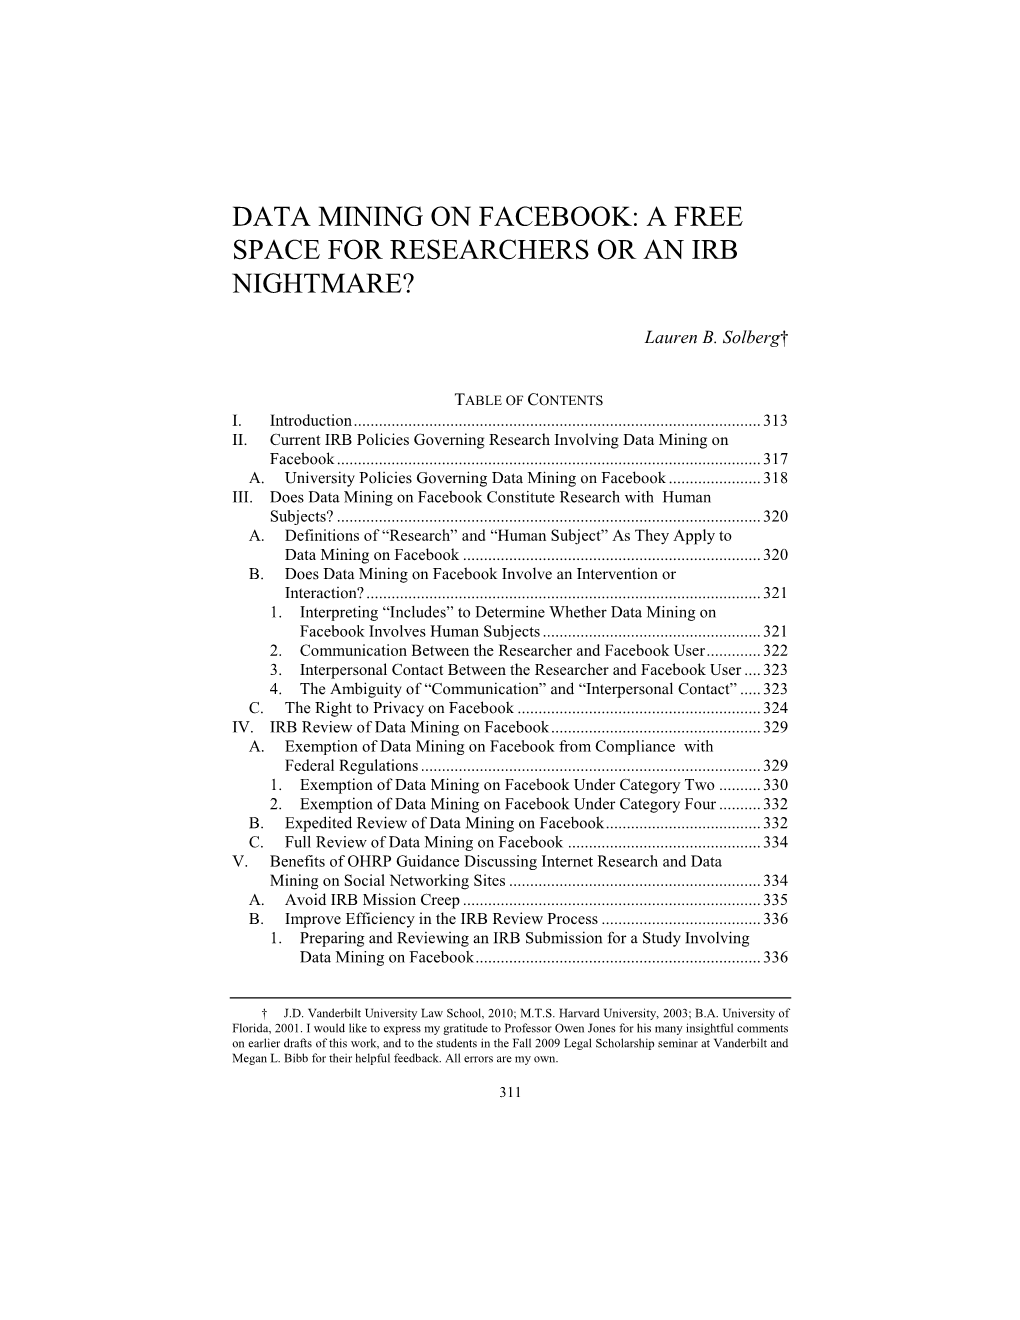 Data Mining on Facebook: a Free Space for Researchers Or an Irb Nightmare?